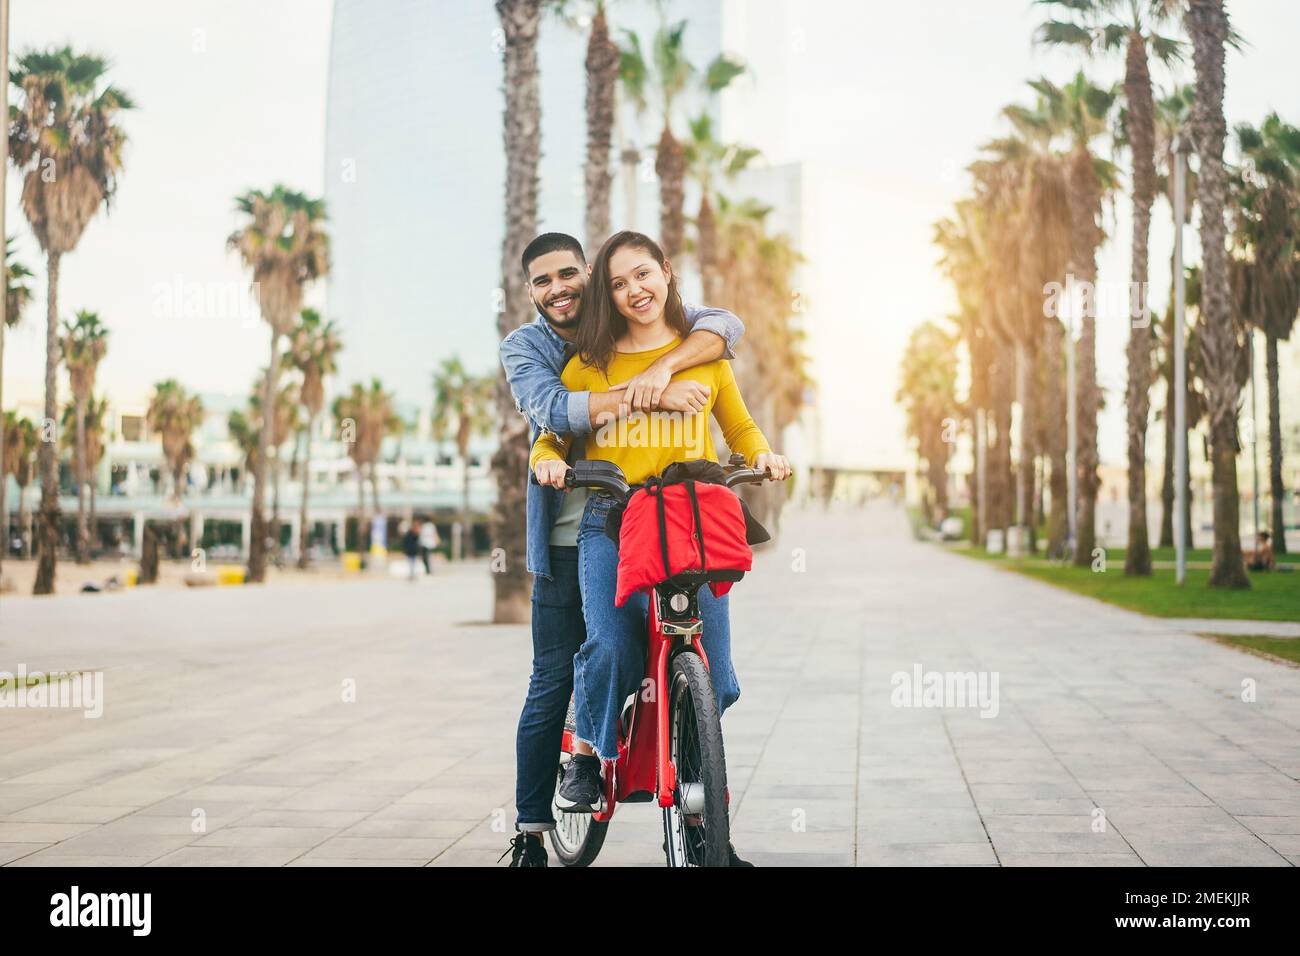 Happy hispanic people having fun with electric bike outdoor - Focus on faces Stock Photo